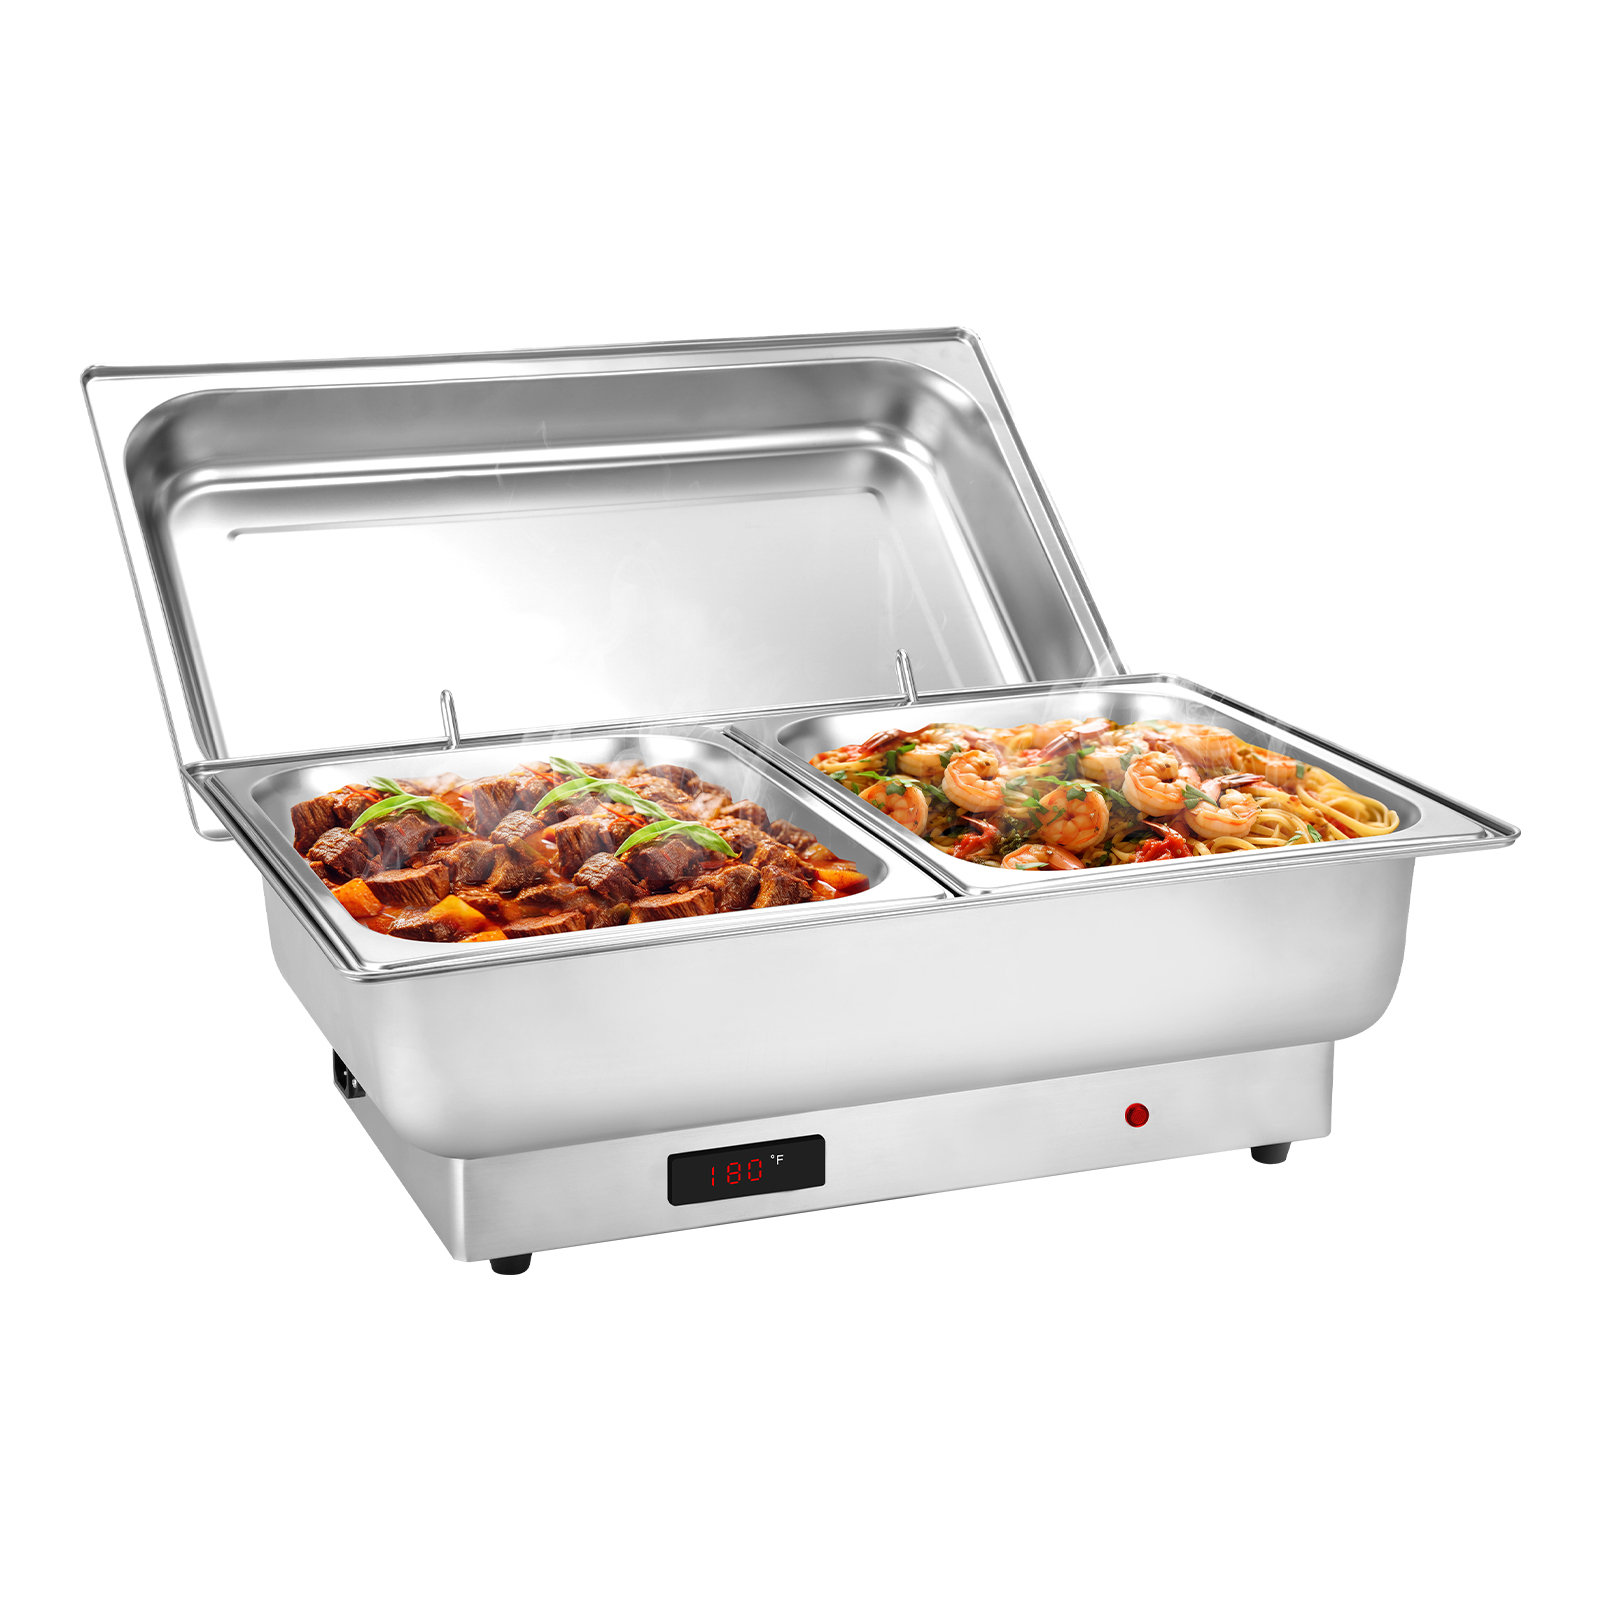 Durable And Efficient electric food warmer buffet server 